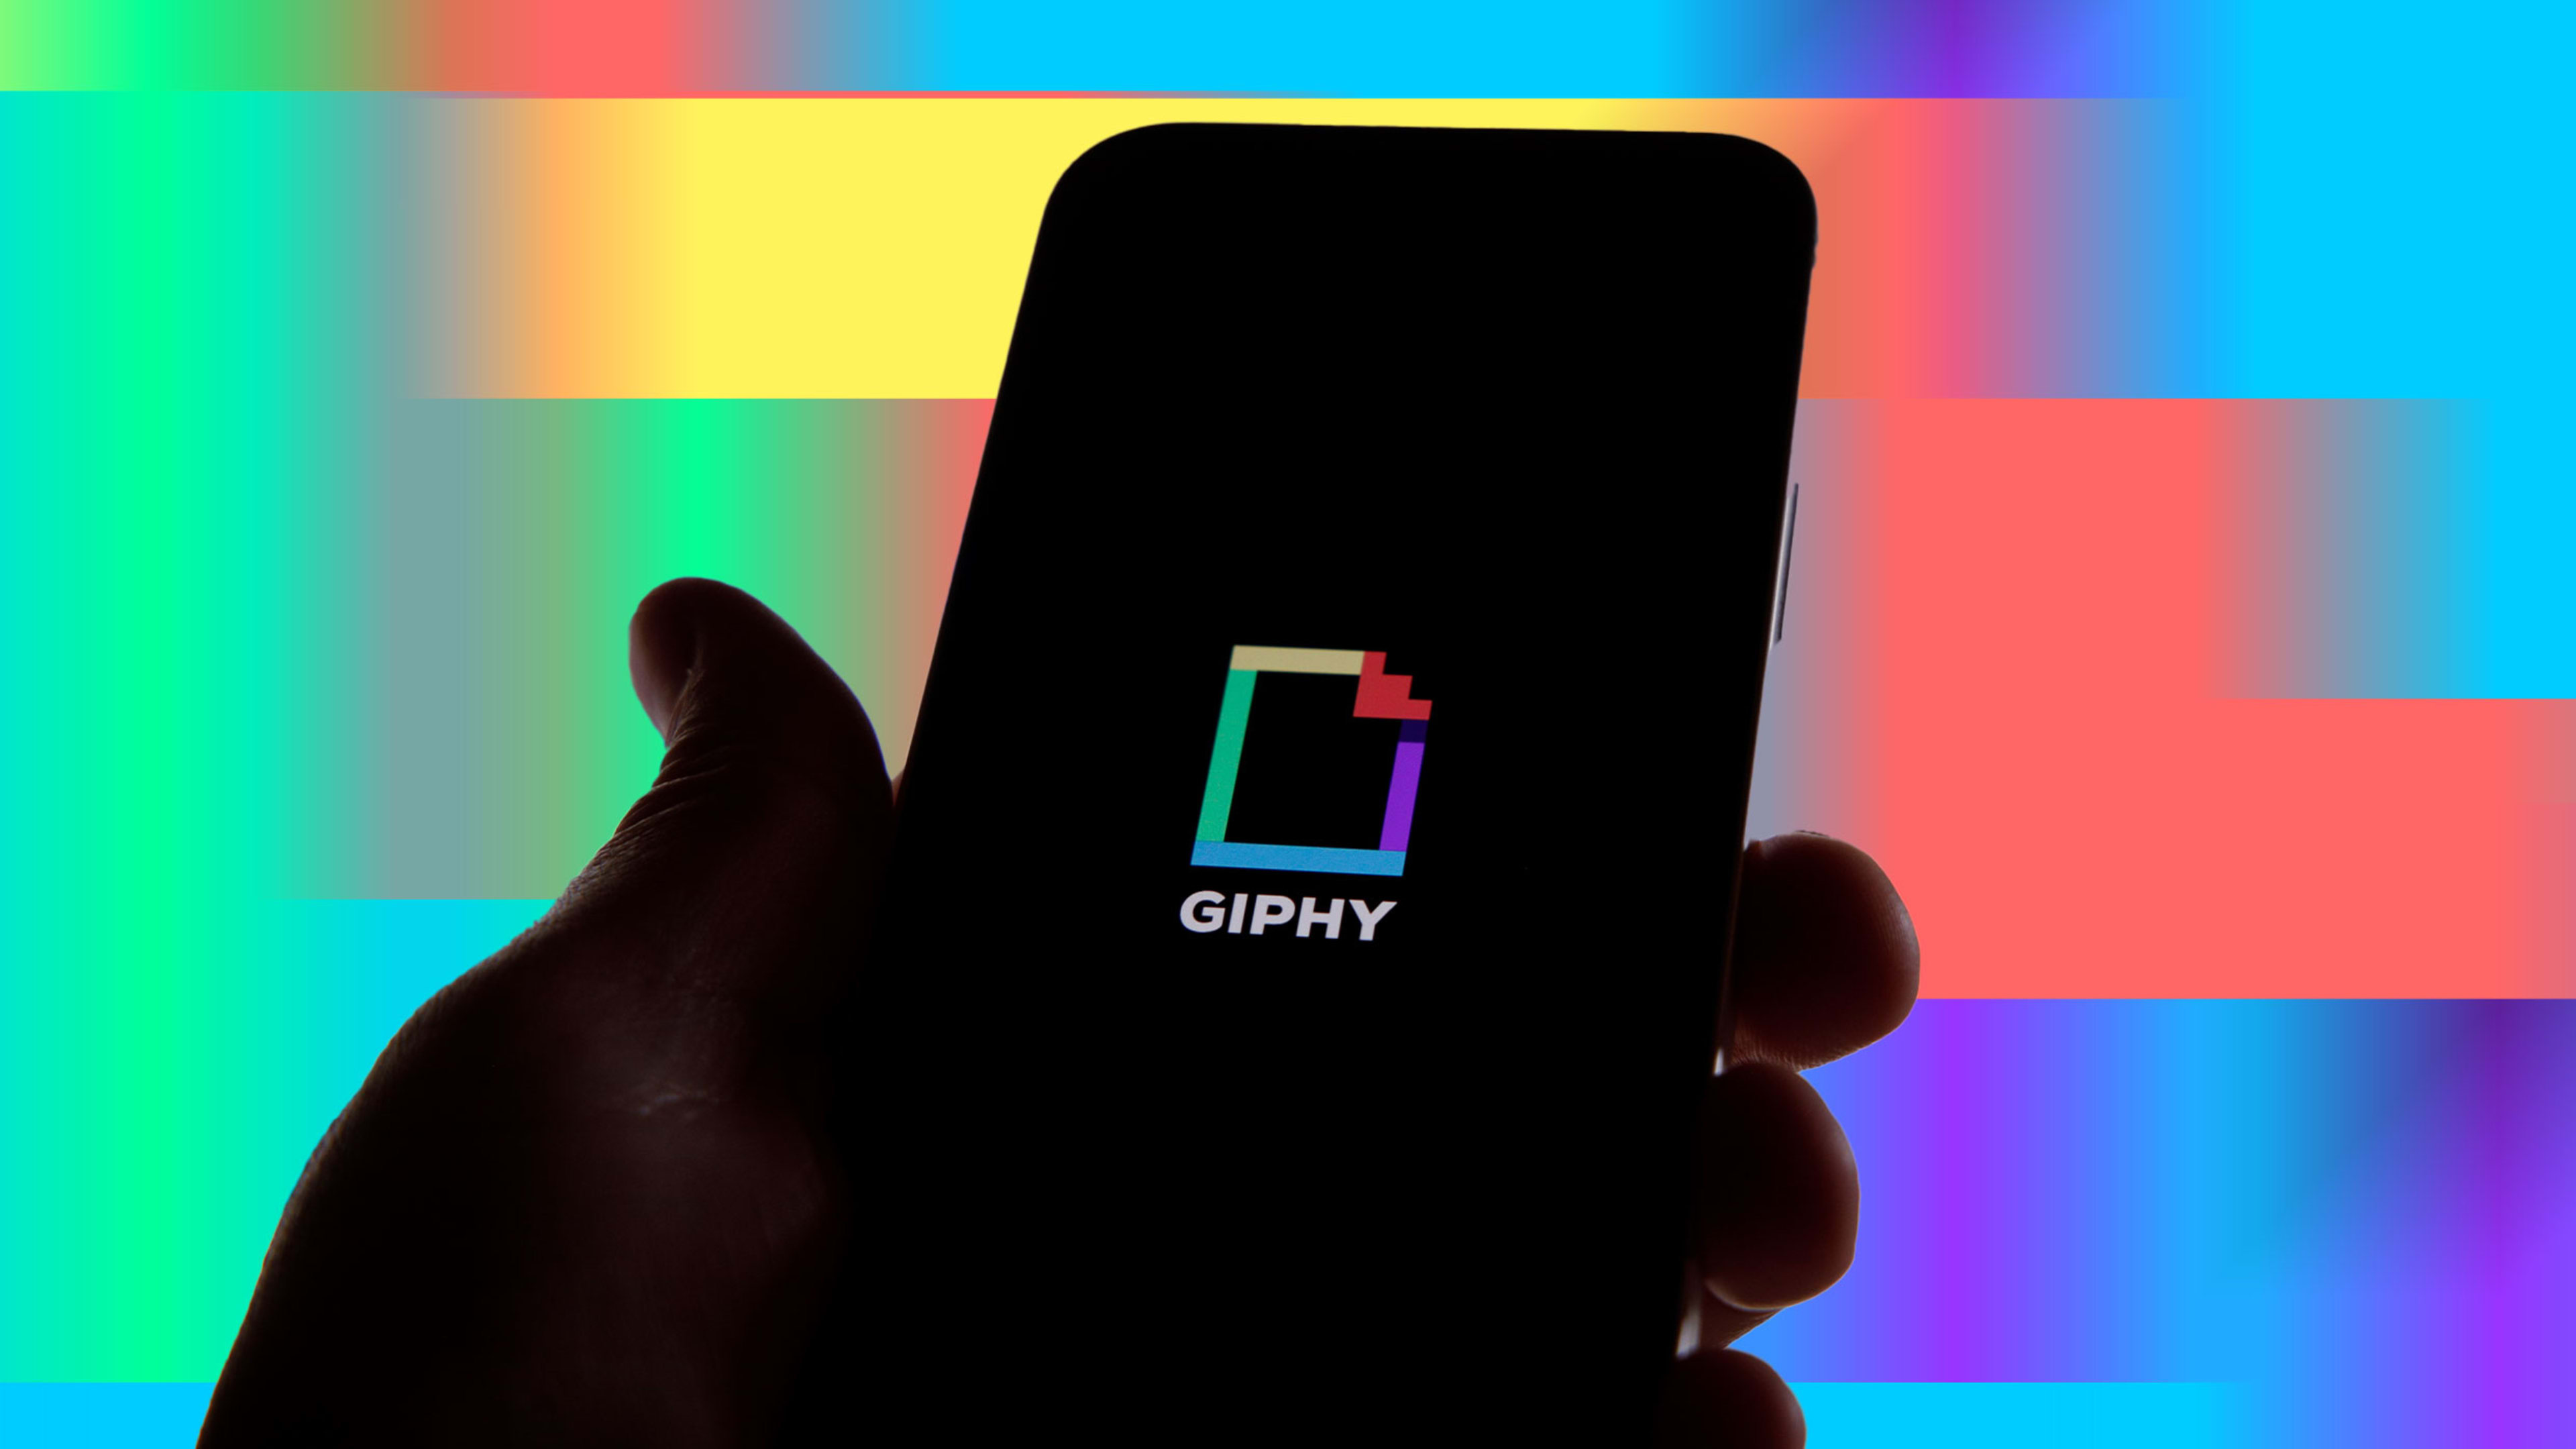 Meta unloads Giphy in the fire sale of the year